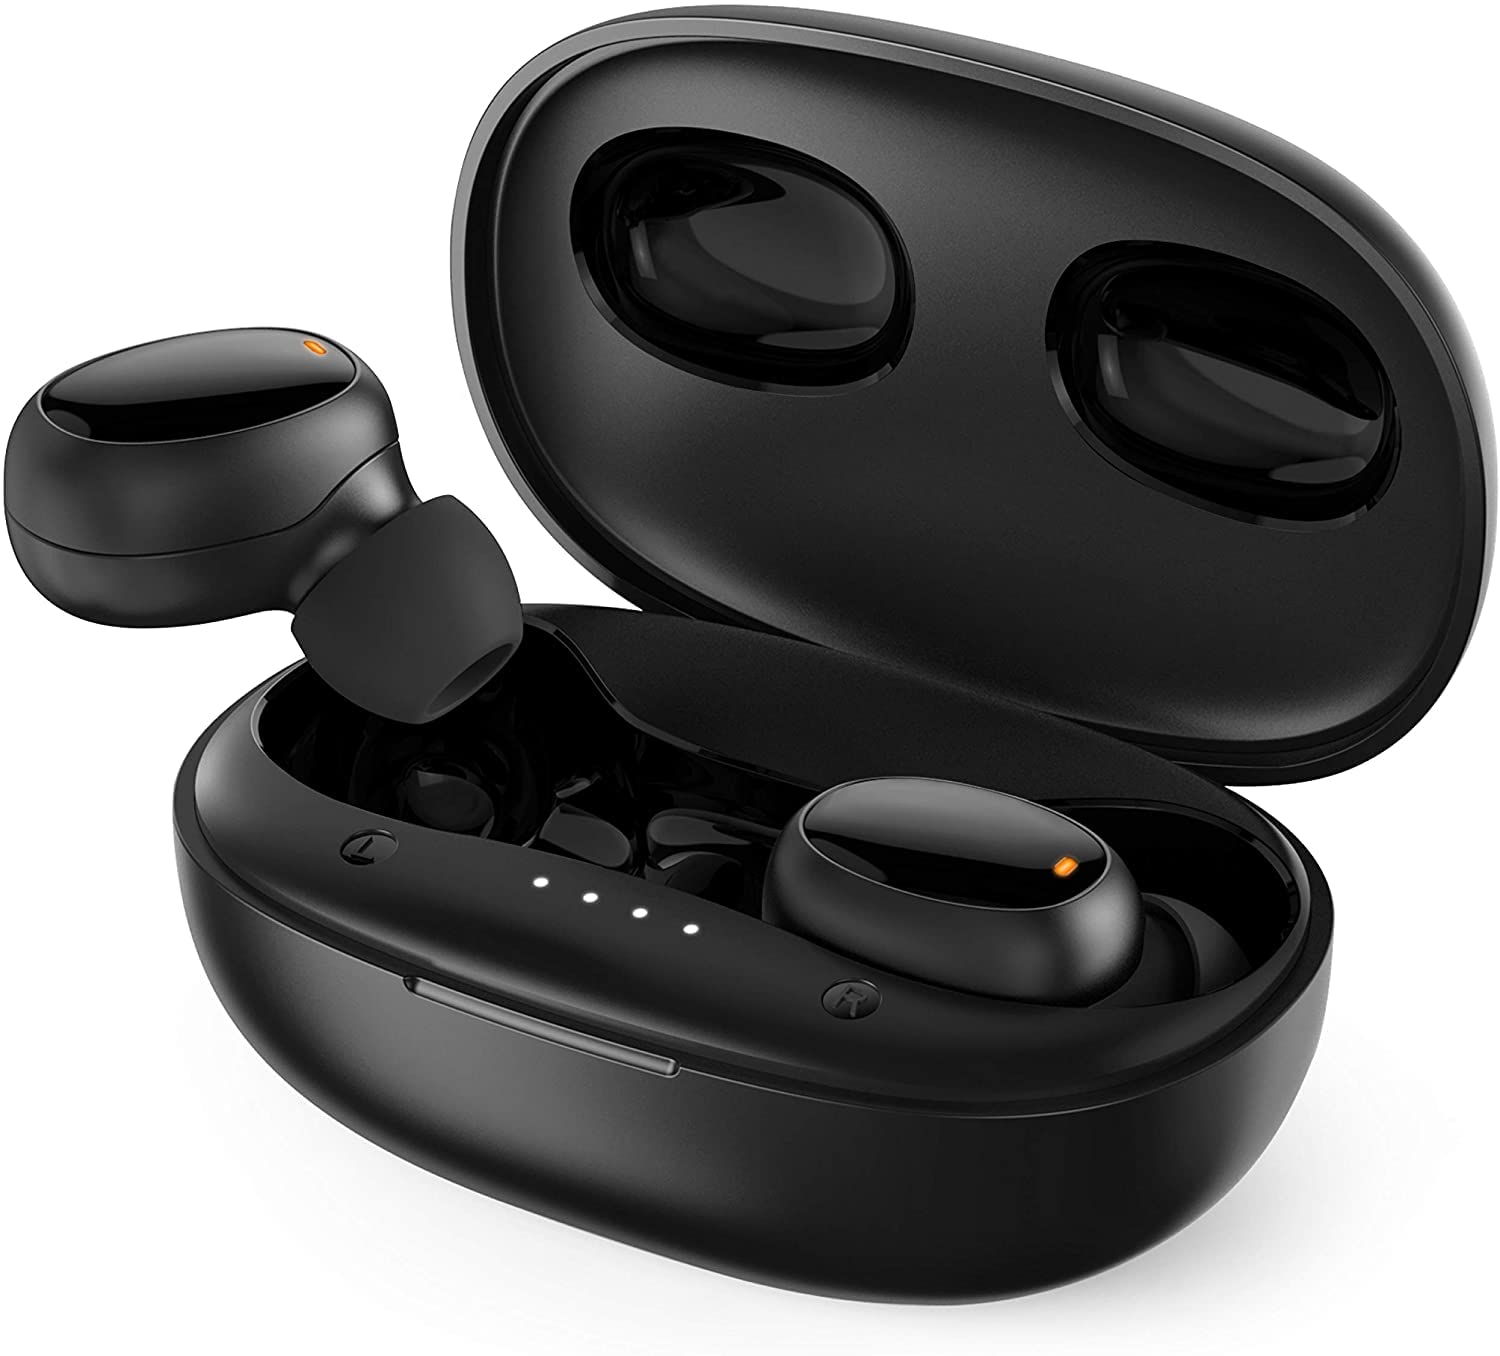 Connecting Wireless Earbuds To Your TV